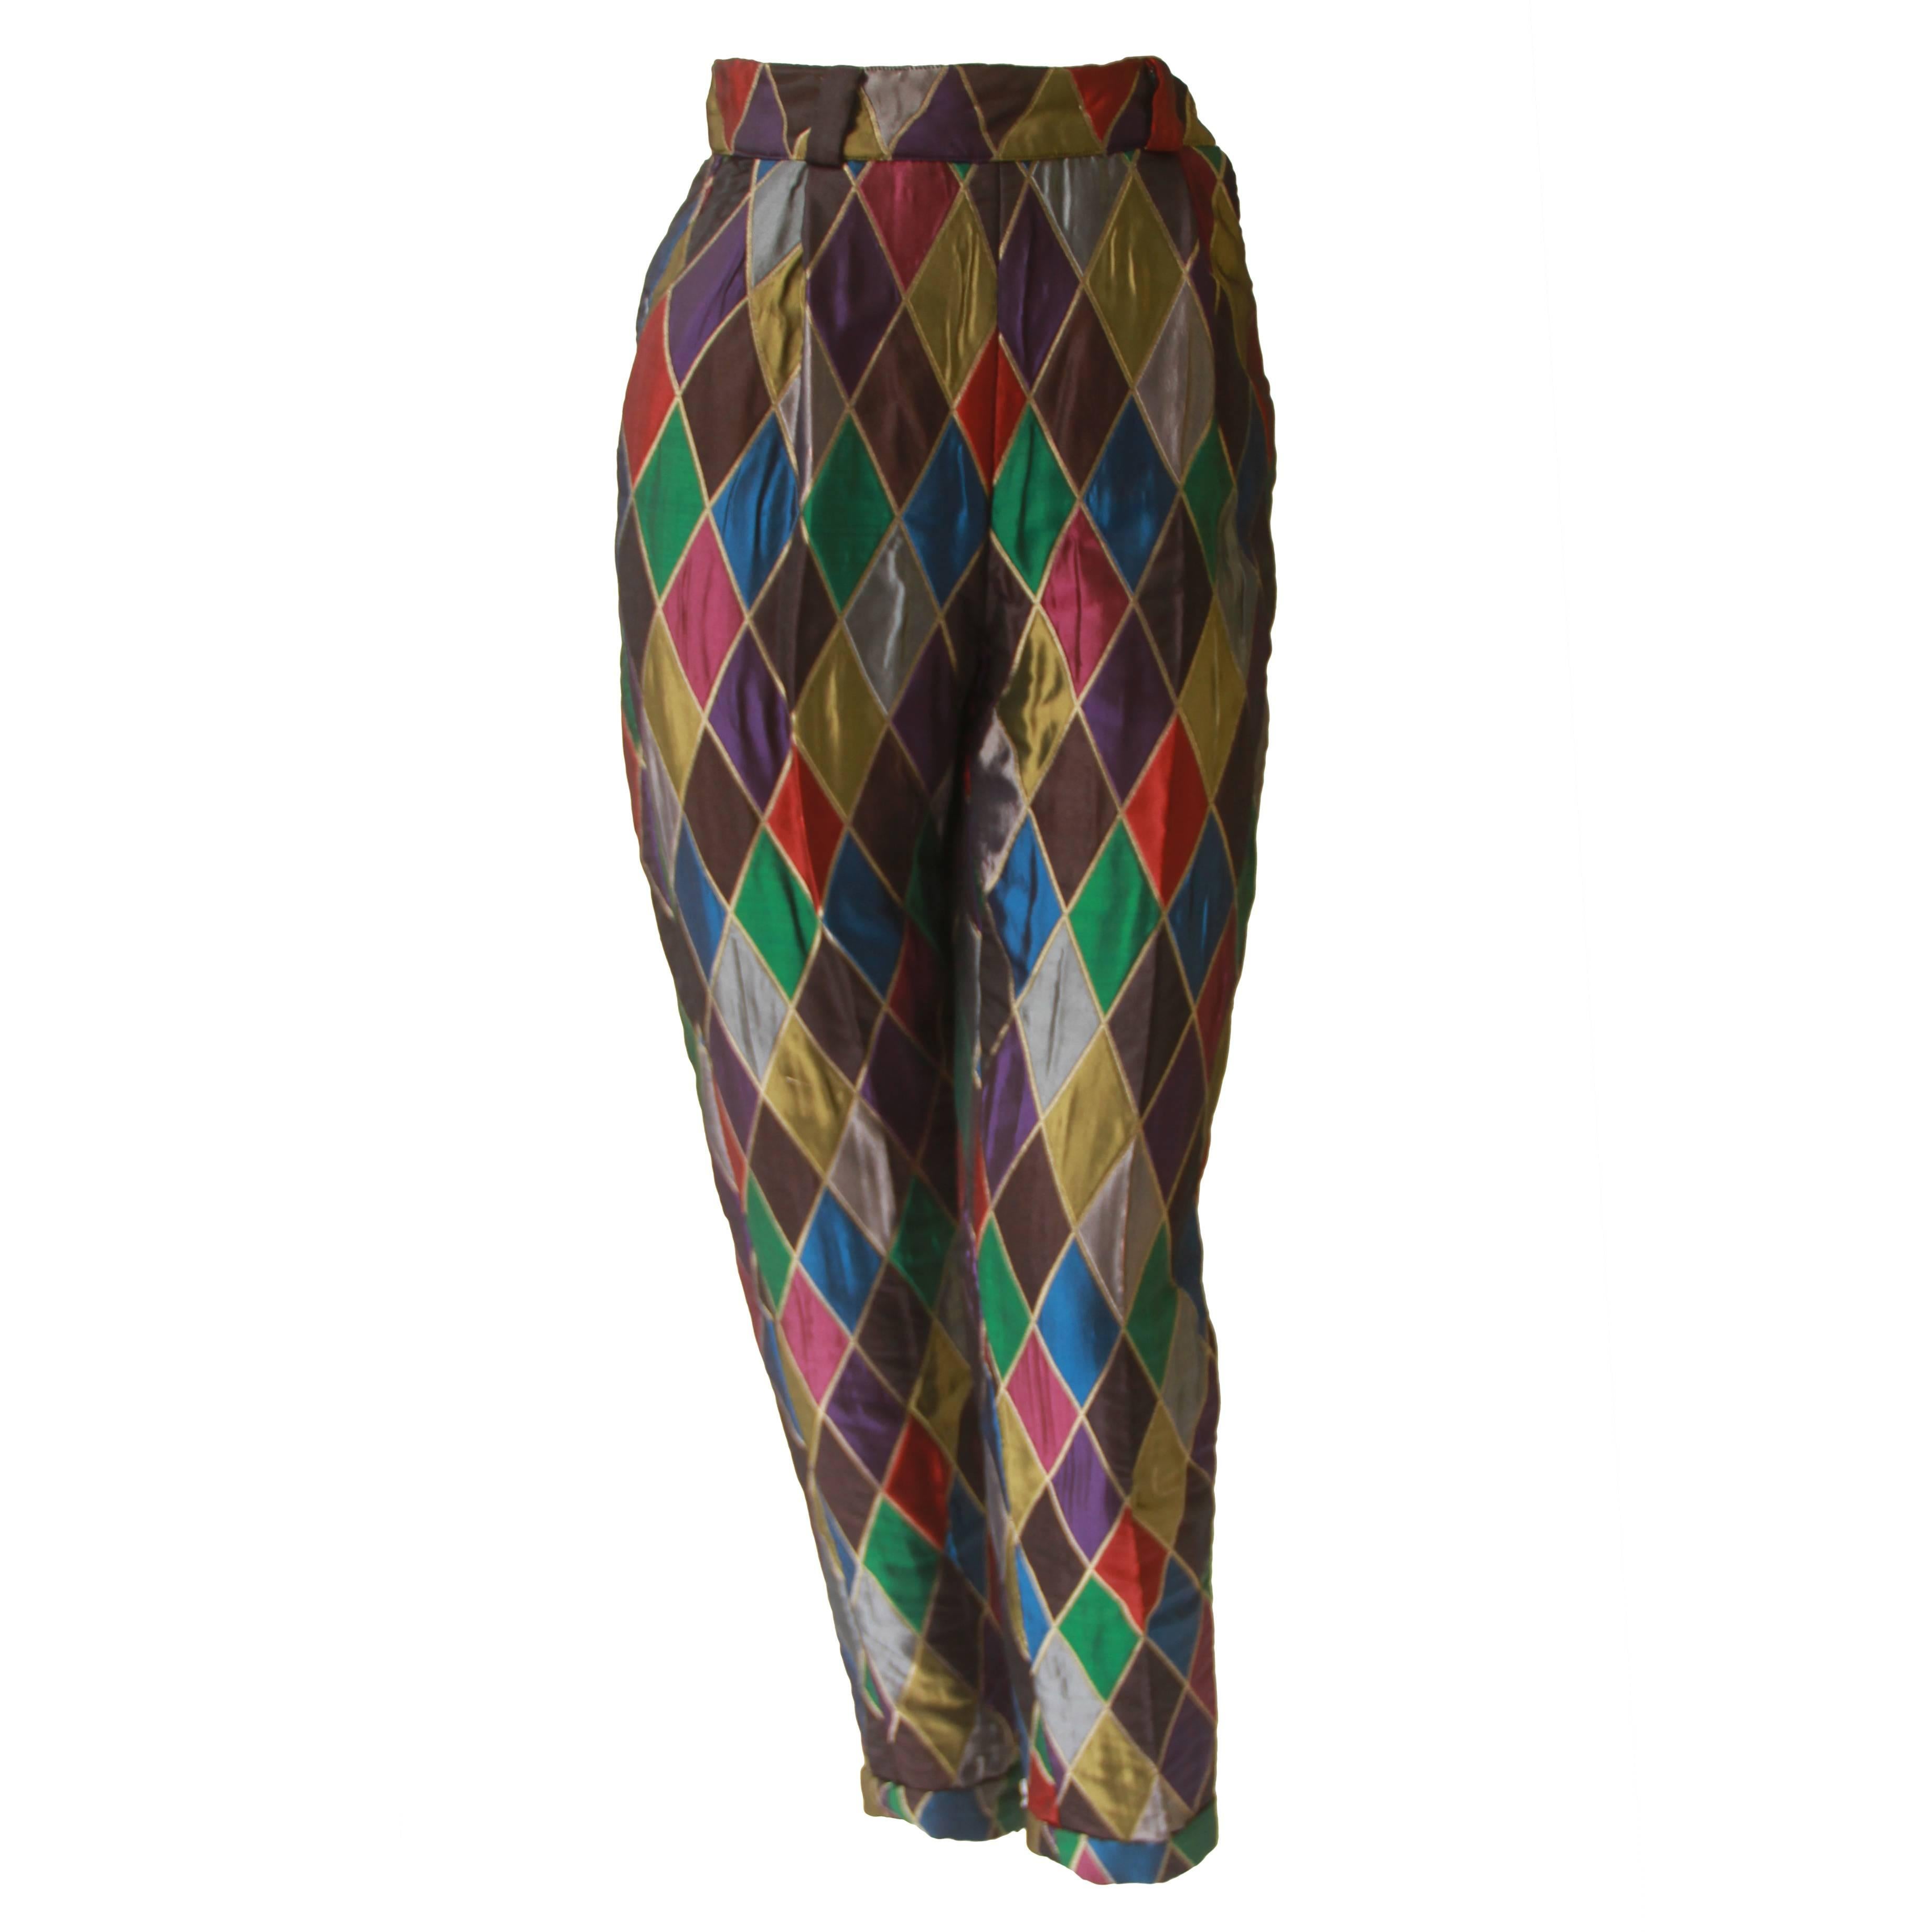 Rare Atelier Versace Quilted Silk Harlequin Printed Pants Fall 1990 For Sale